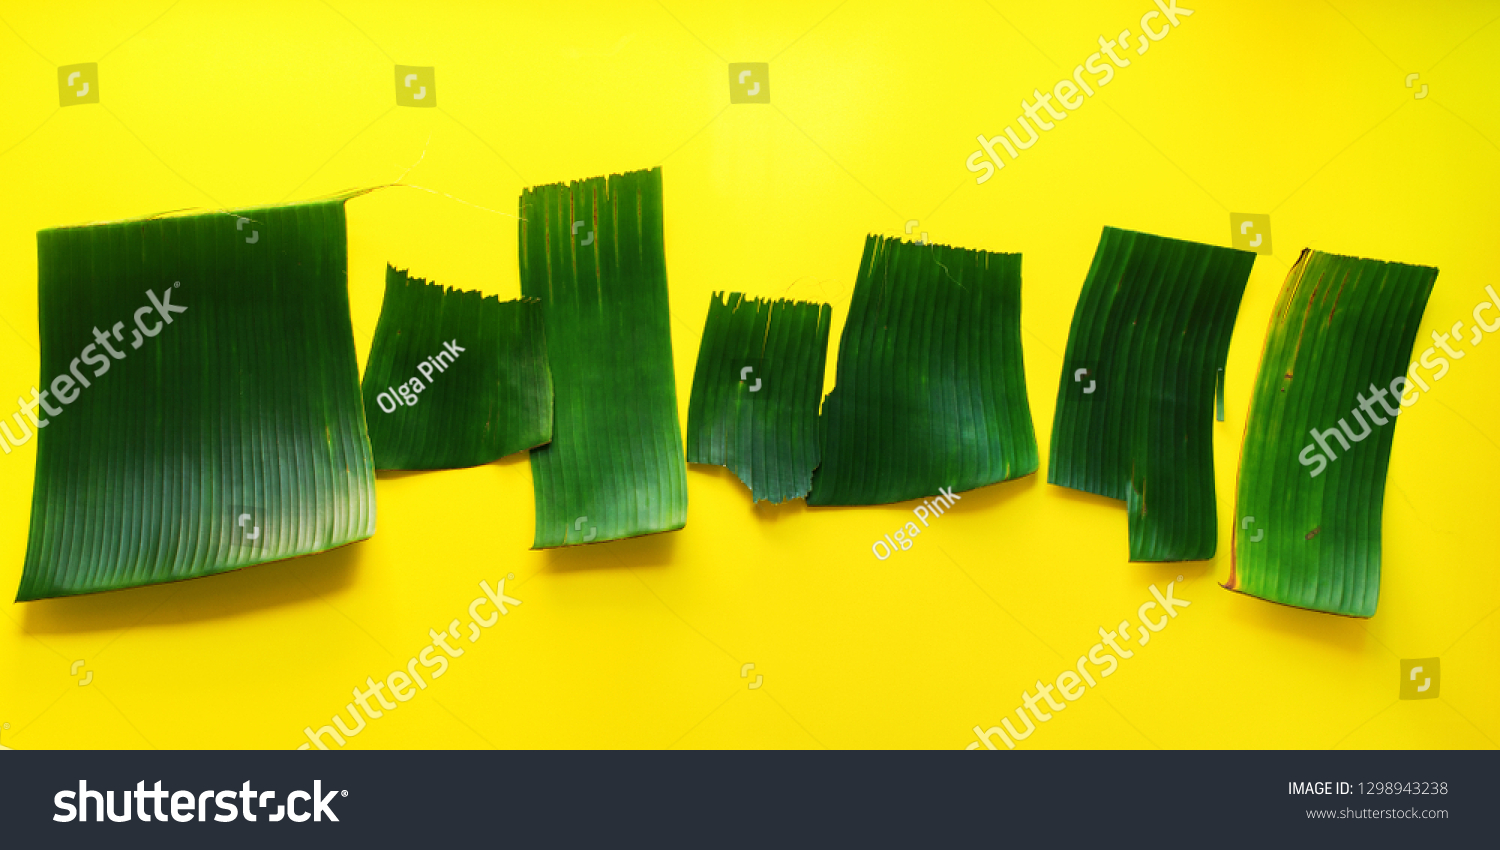 Empty templates for letters from green tropical palm leaves on yellow textured background. Original handmade idea from natural material for summer design #1298943238